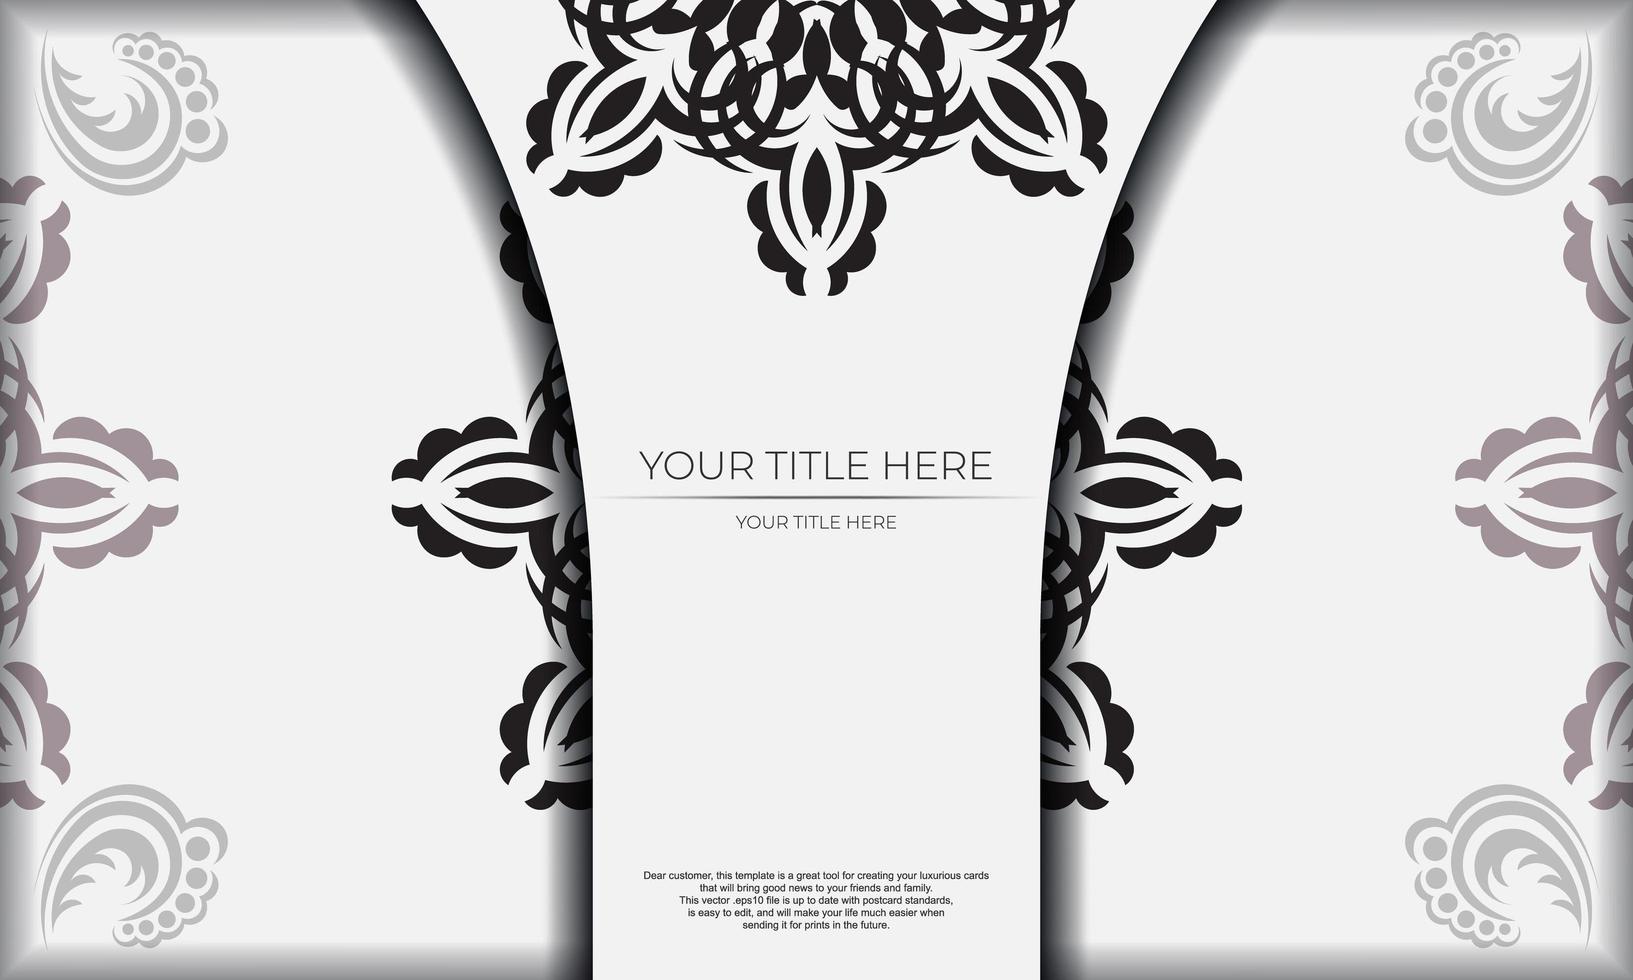 White luxury background with abstract ornament. Elegant and classic vector elements ready for print and typography.